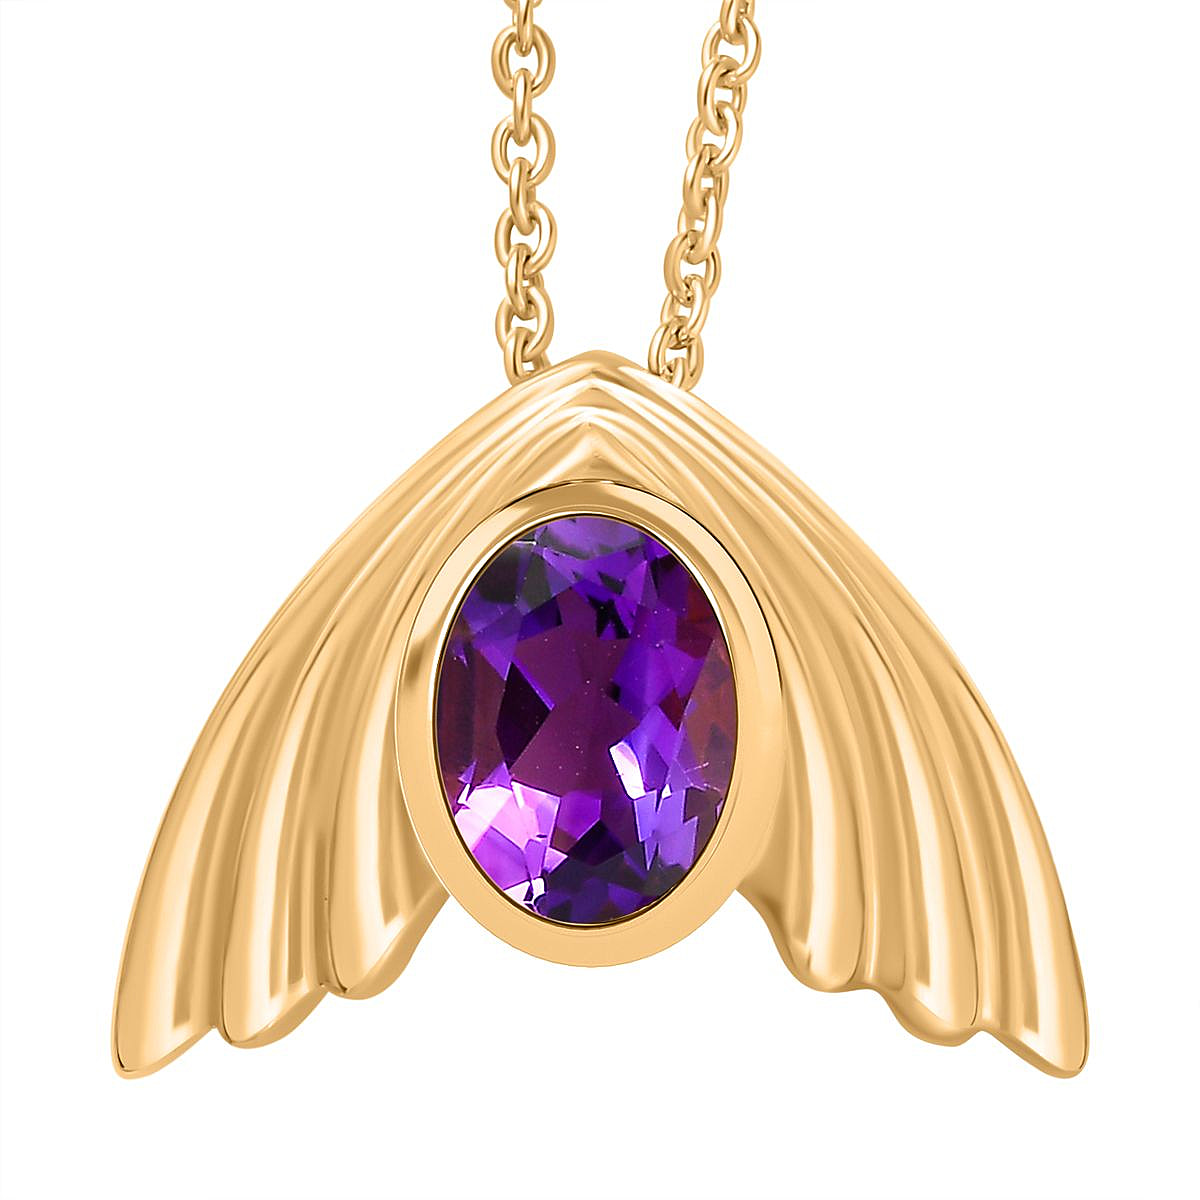 Moroccan Amethyst Pendant with Chain (Size 20) in 18K Vermeil YG Plated Sterling Silver  Wt. 5.62 Gms  1.820  Ct.